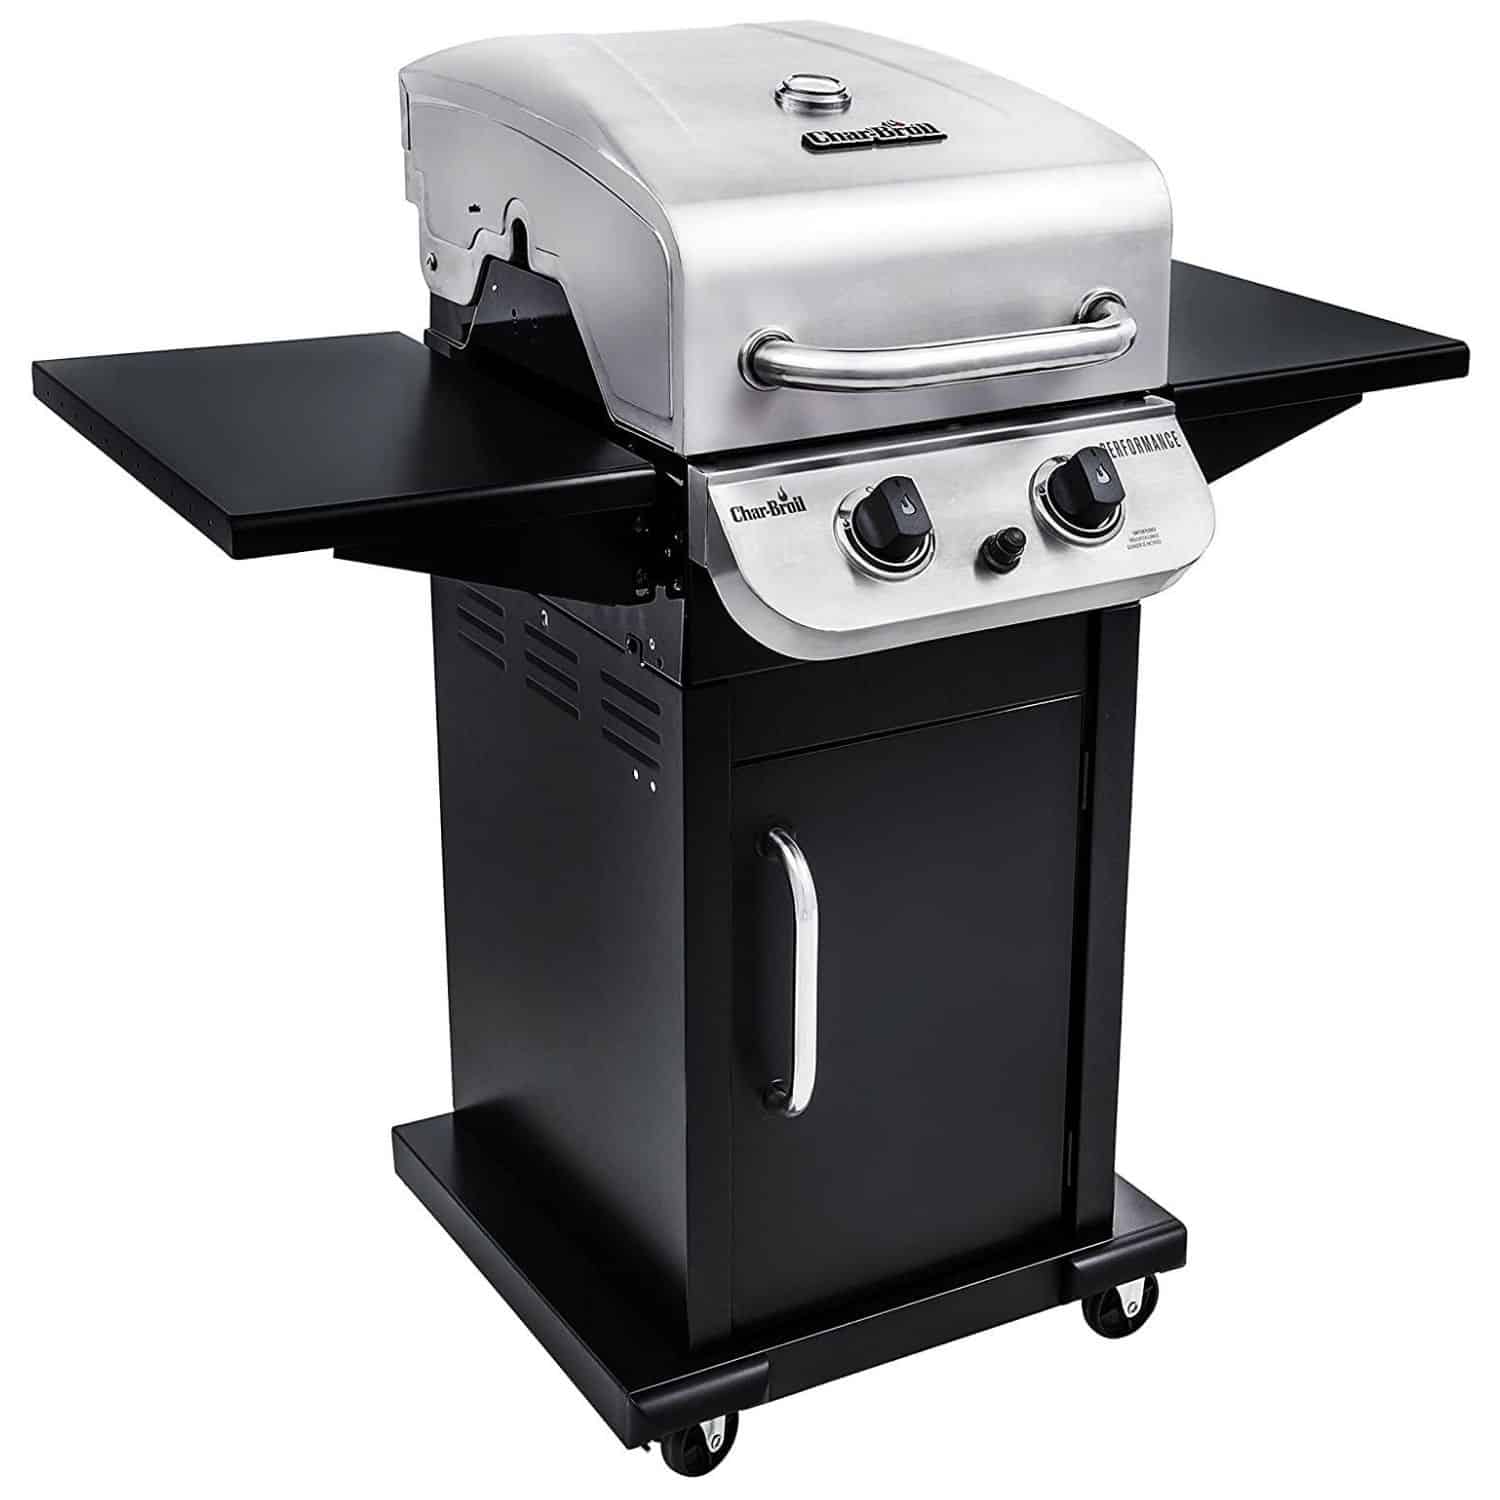 Char-Broil 463673519 Performance Series 2-Burner Cabinet Gas Grill